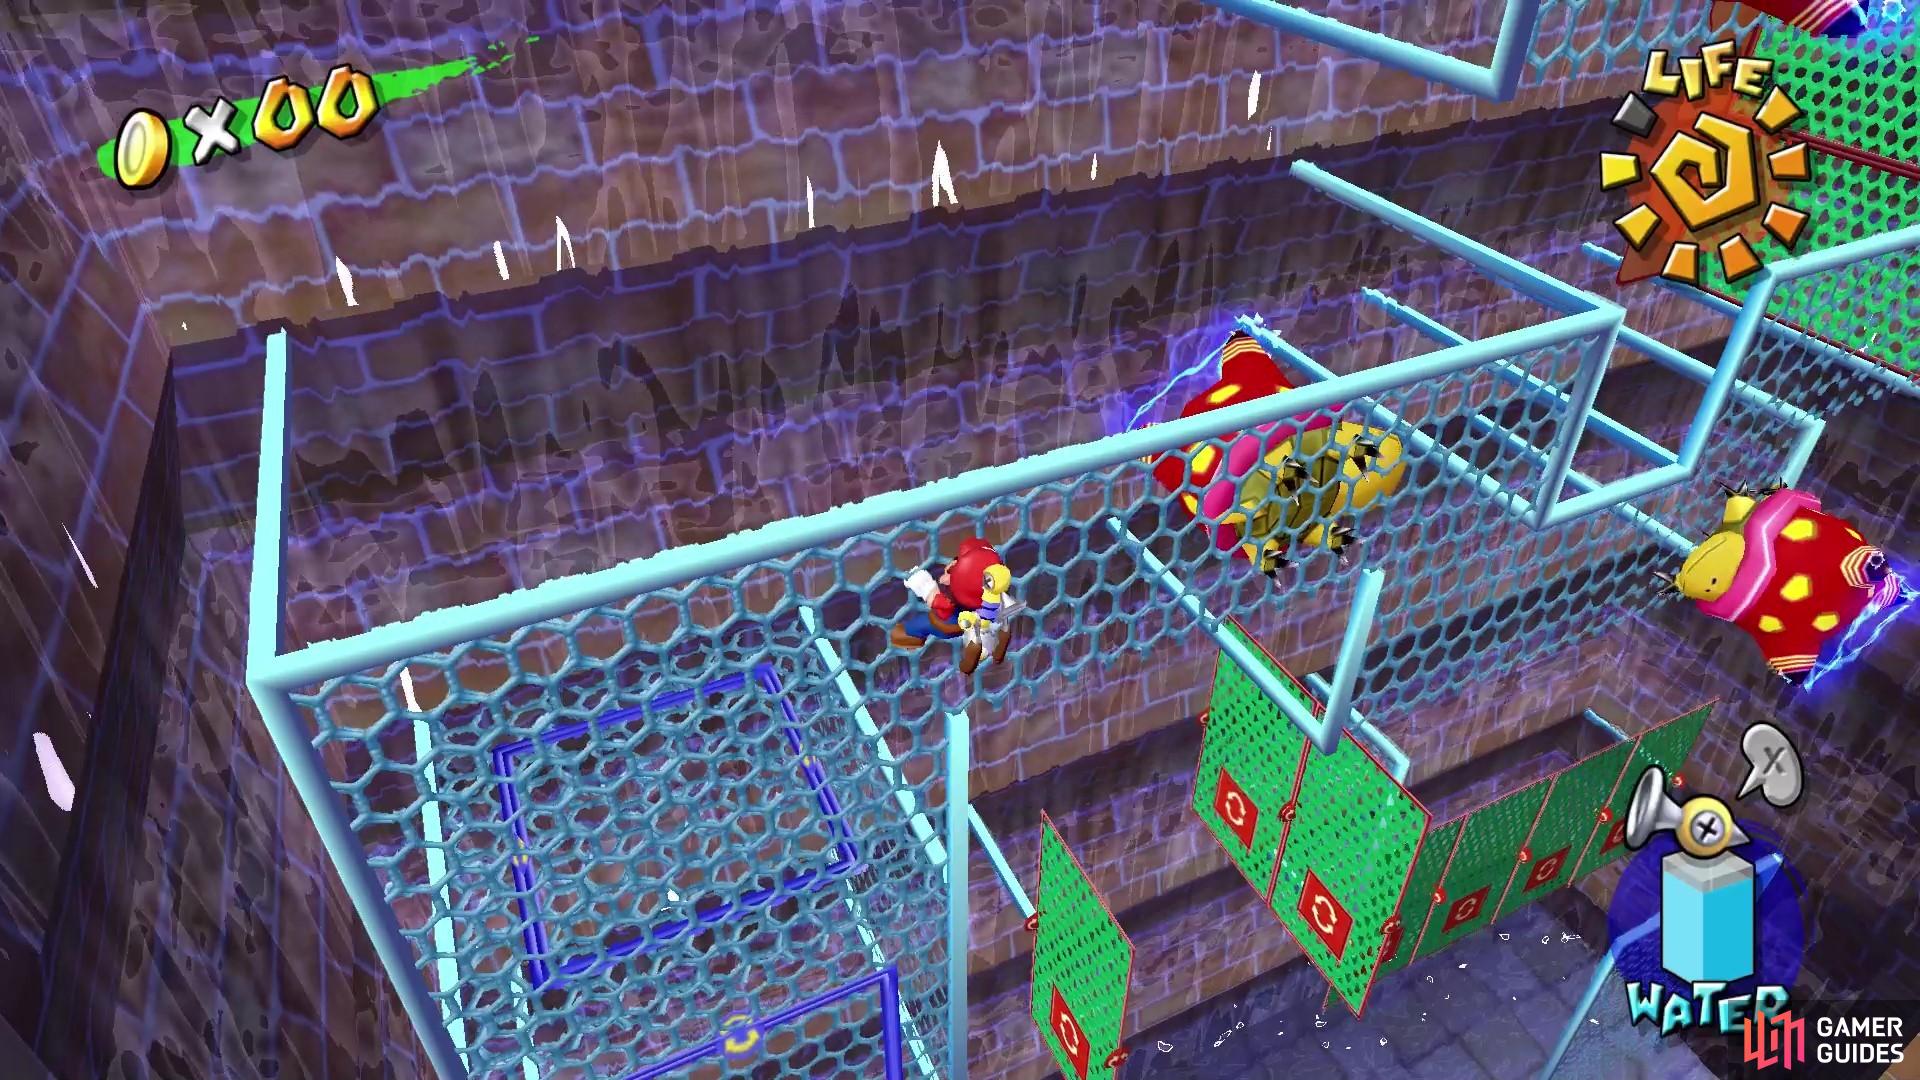 and press A to punch koopas off the mesh.